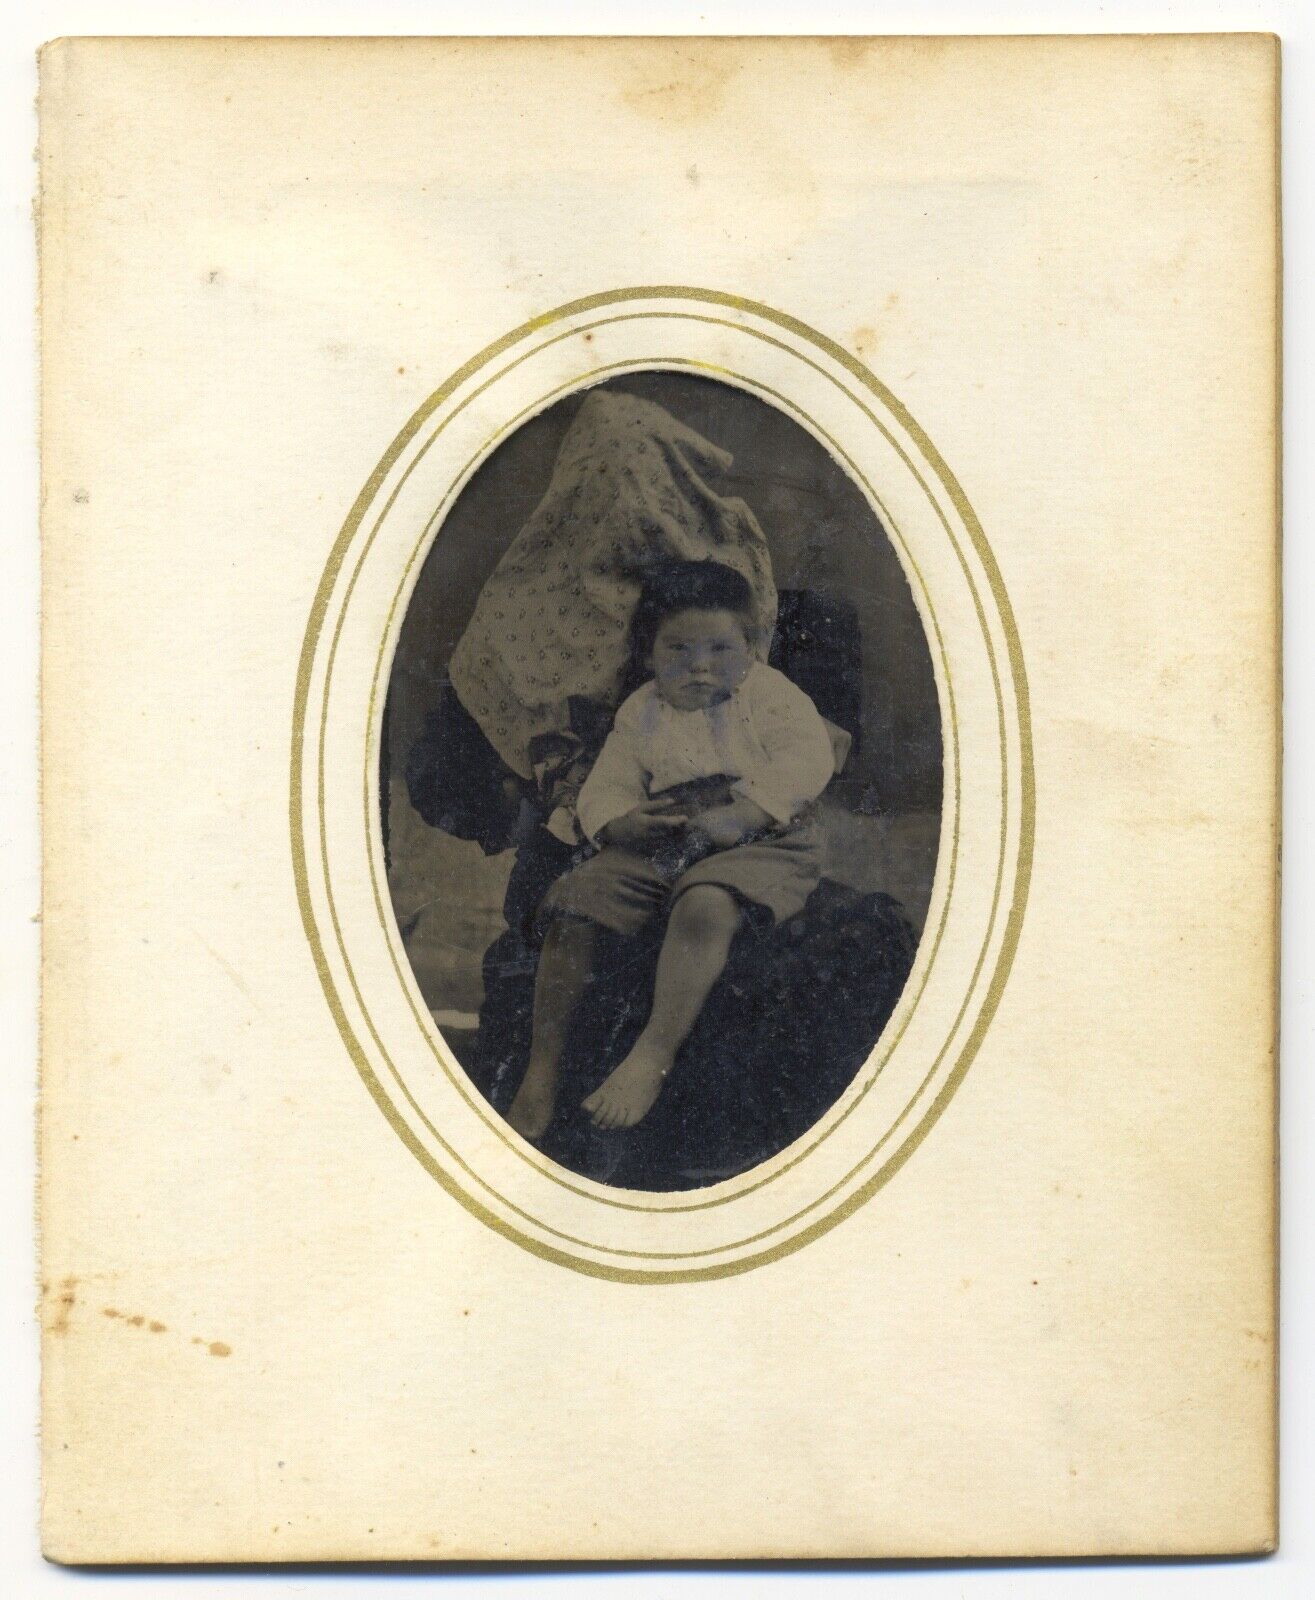 A very silly hidden mother tintype